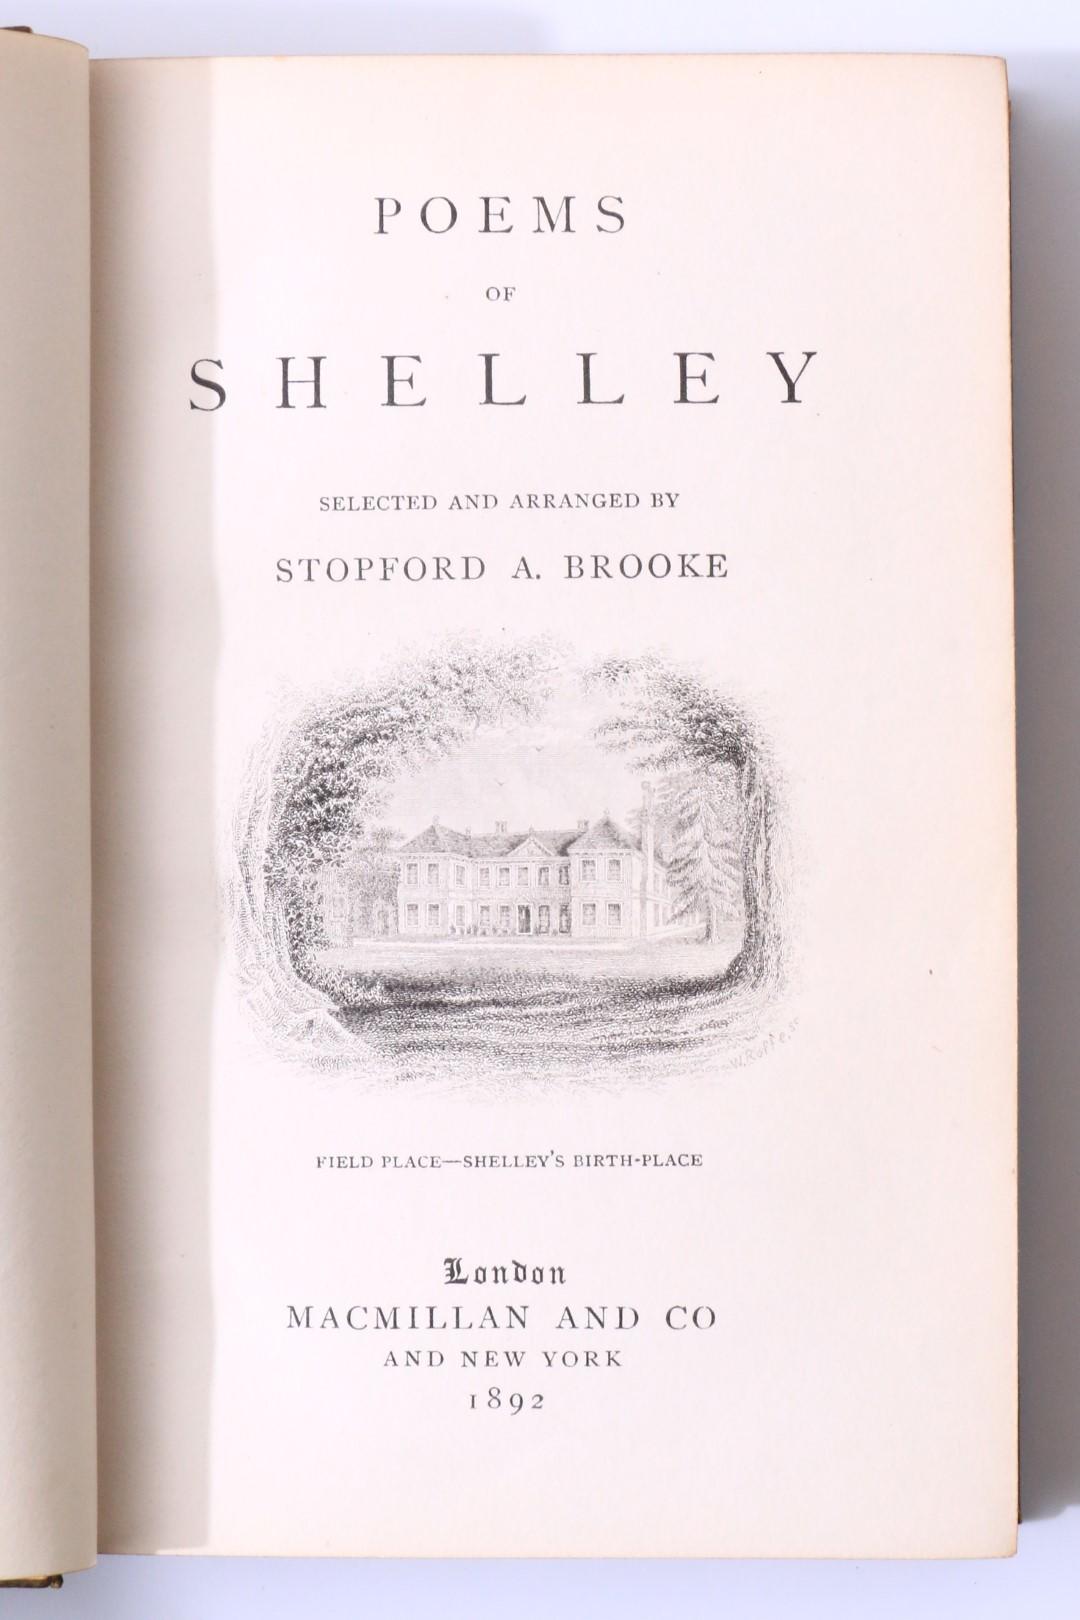 Percy Bysshe Shelley - Poems of Shelley - Macmillan, 1892, First Edition.